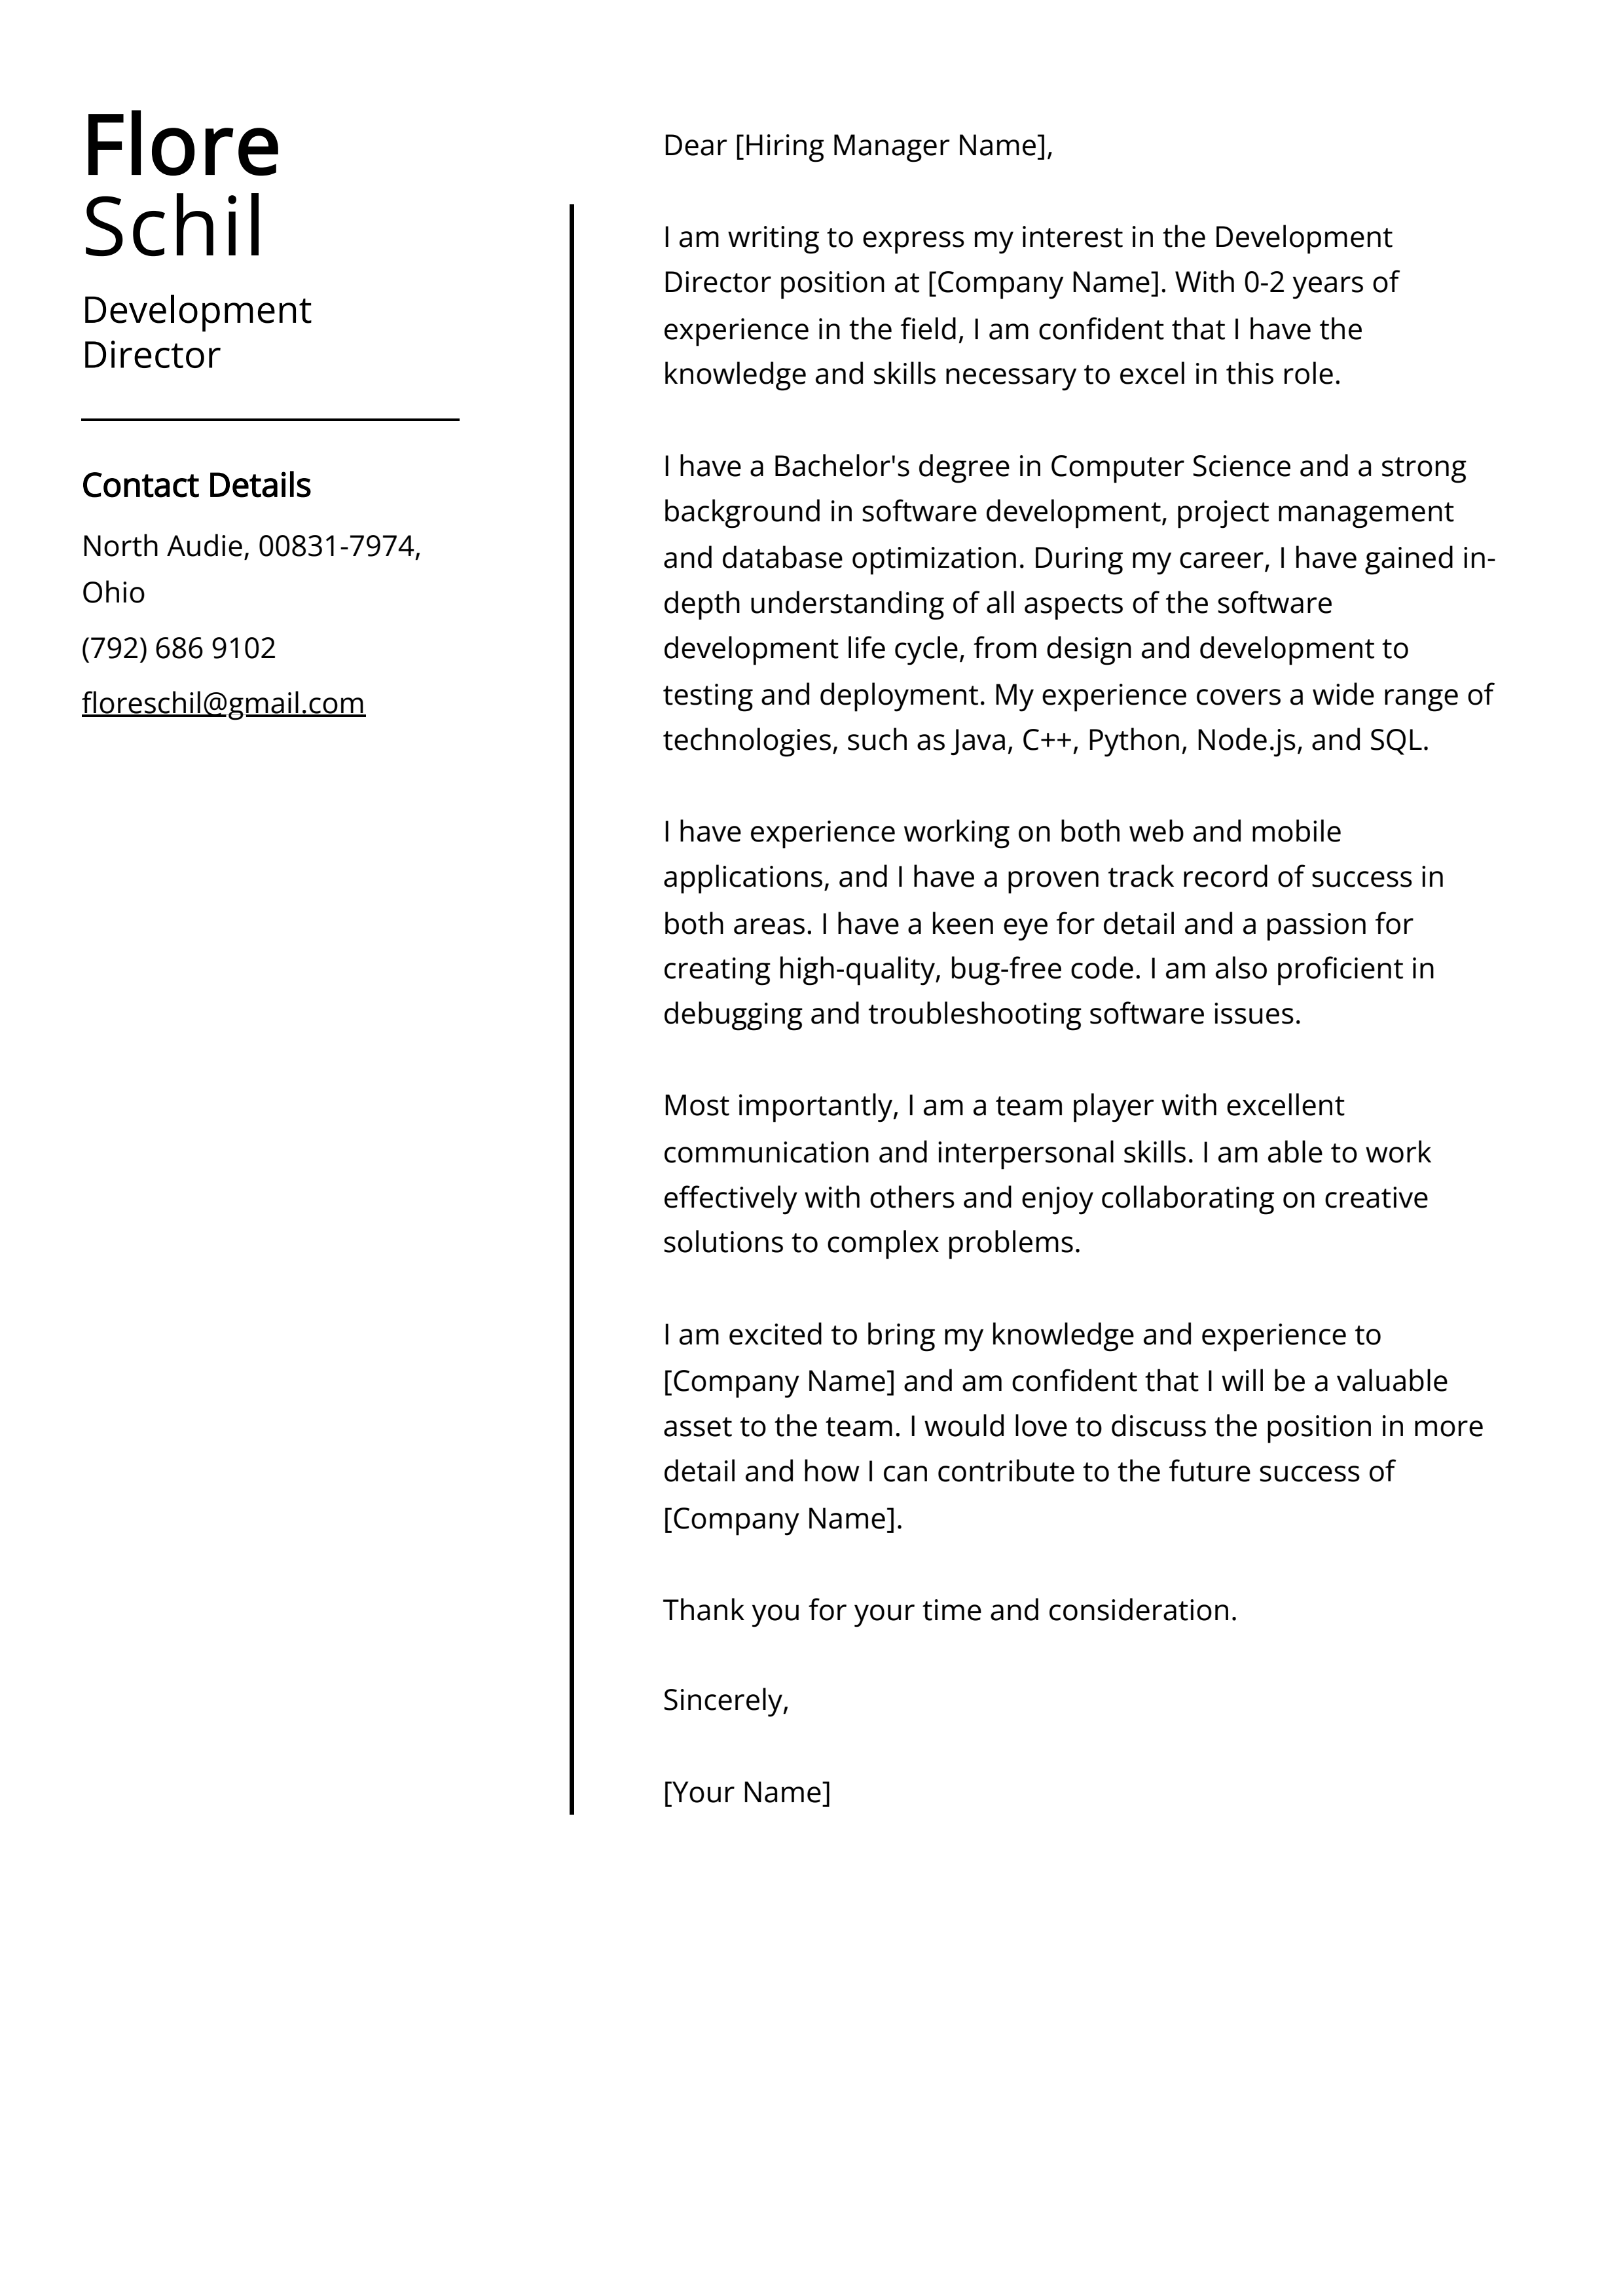 Development Director Cover Letter Example